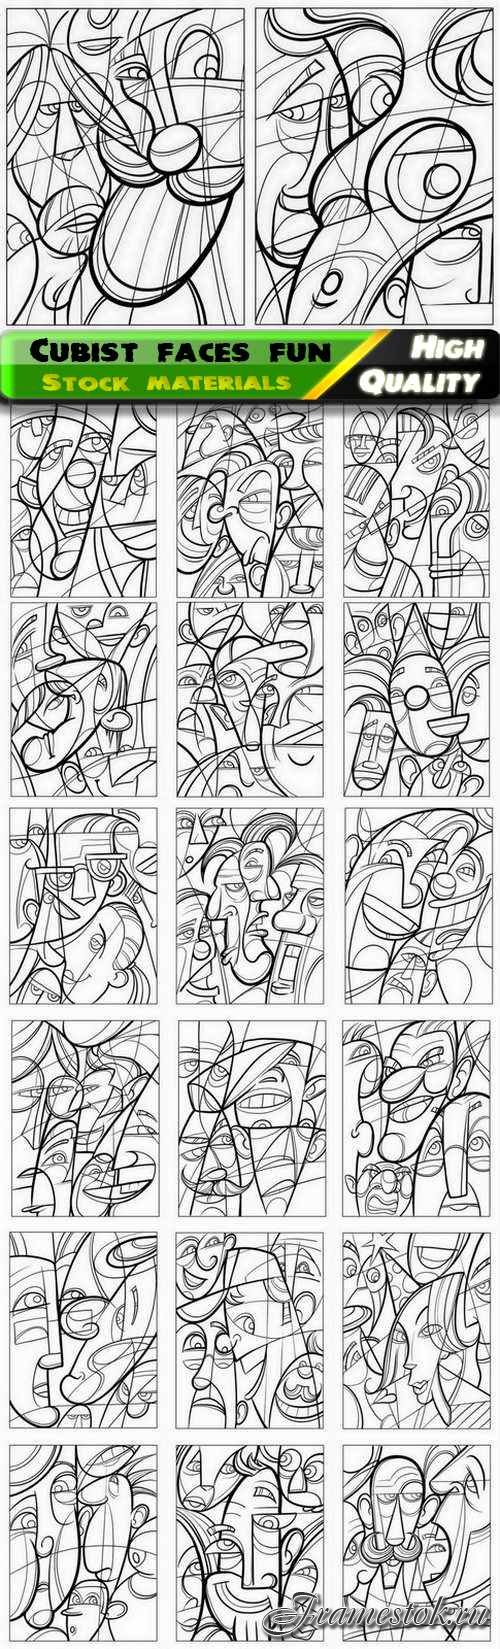 Cubist faces fun and coloring book creative art pictures 20 Eps